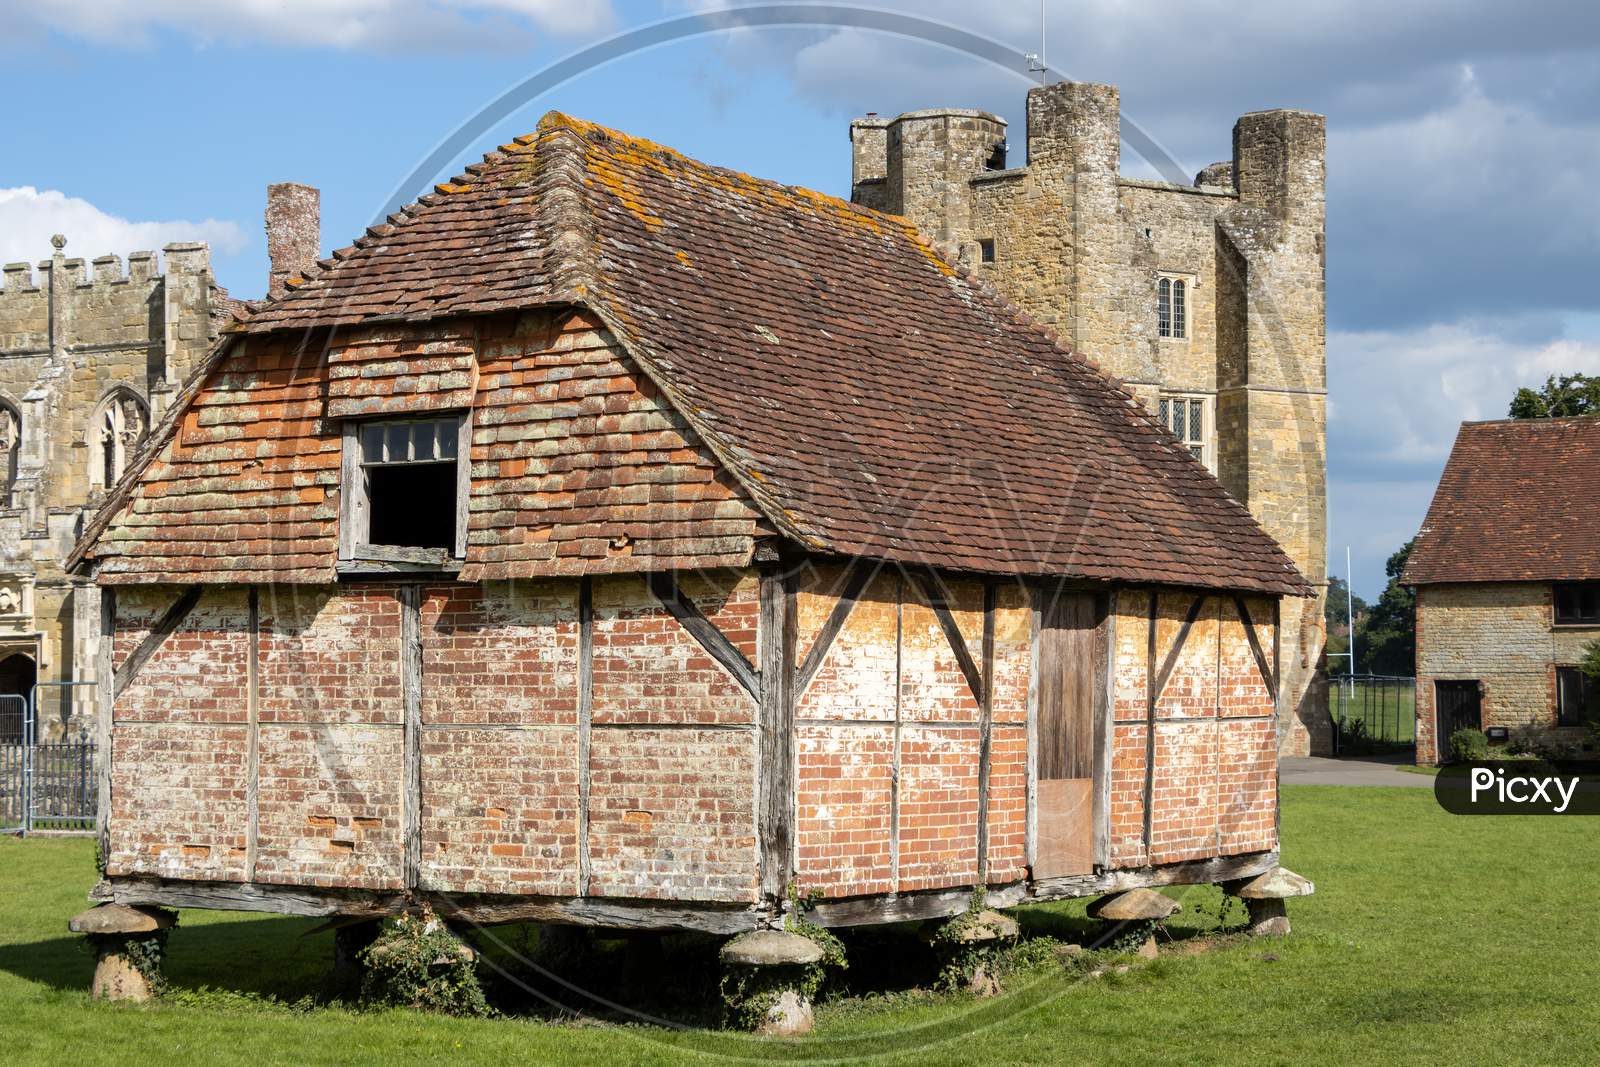 Midhurst, West Sussex/Uk - September 1 : View Of The Cowdray Castle Medieval Granary Set On Toadstools To Prevent Access By Rats In Midhurst, West Sussex On September 1, 2020